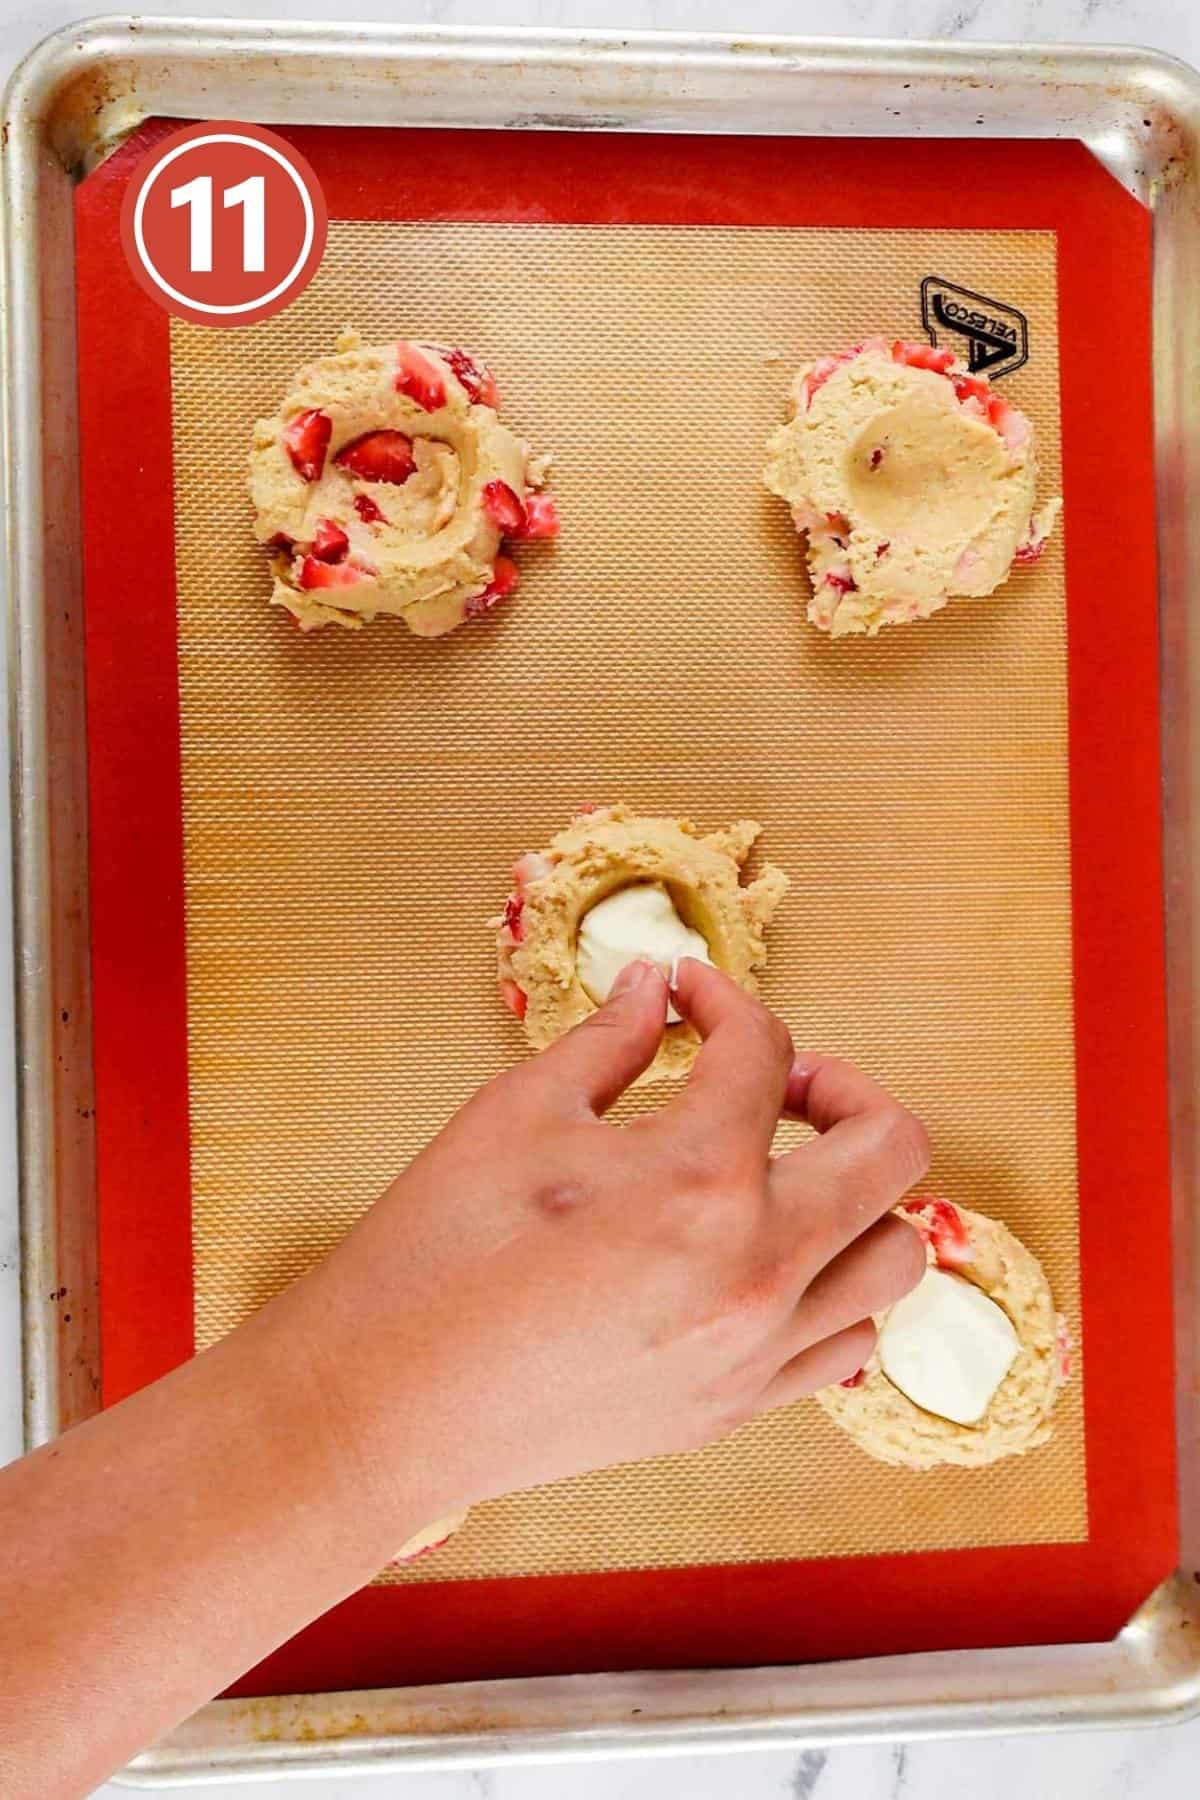 placing cream cheese dollop in the middle of the cookies.